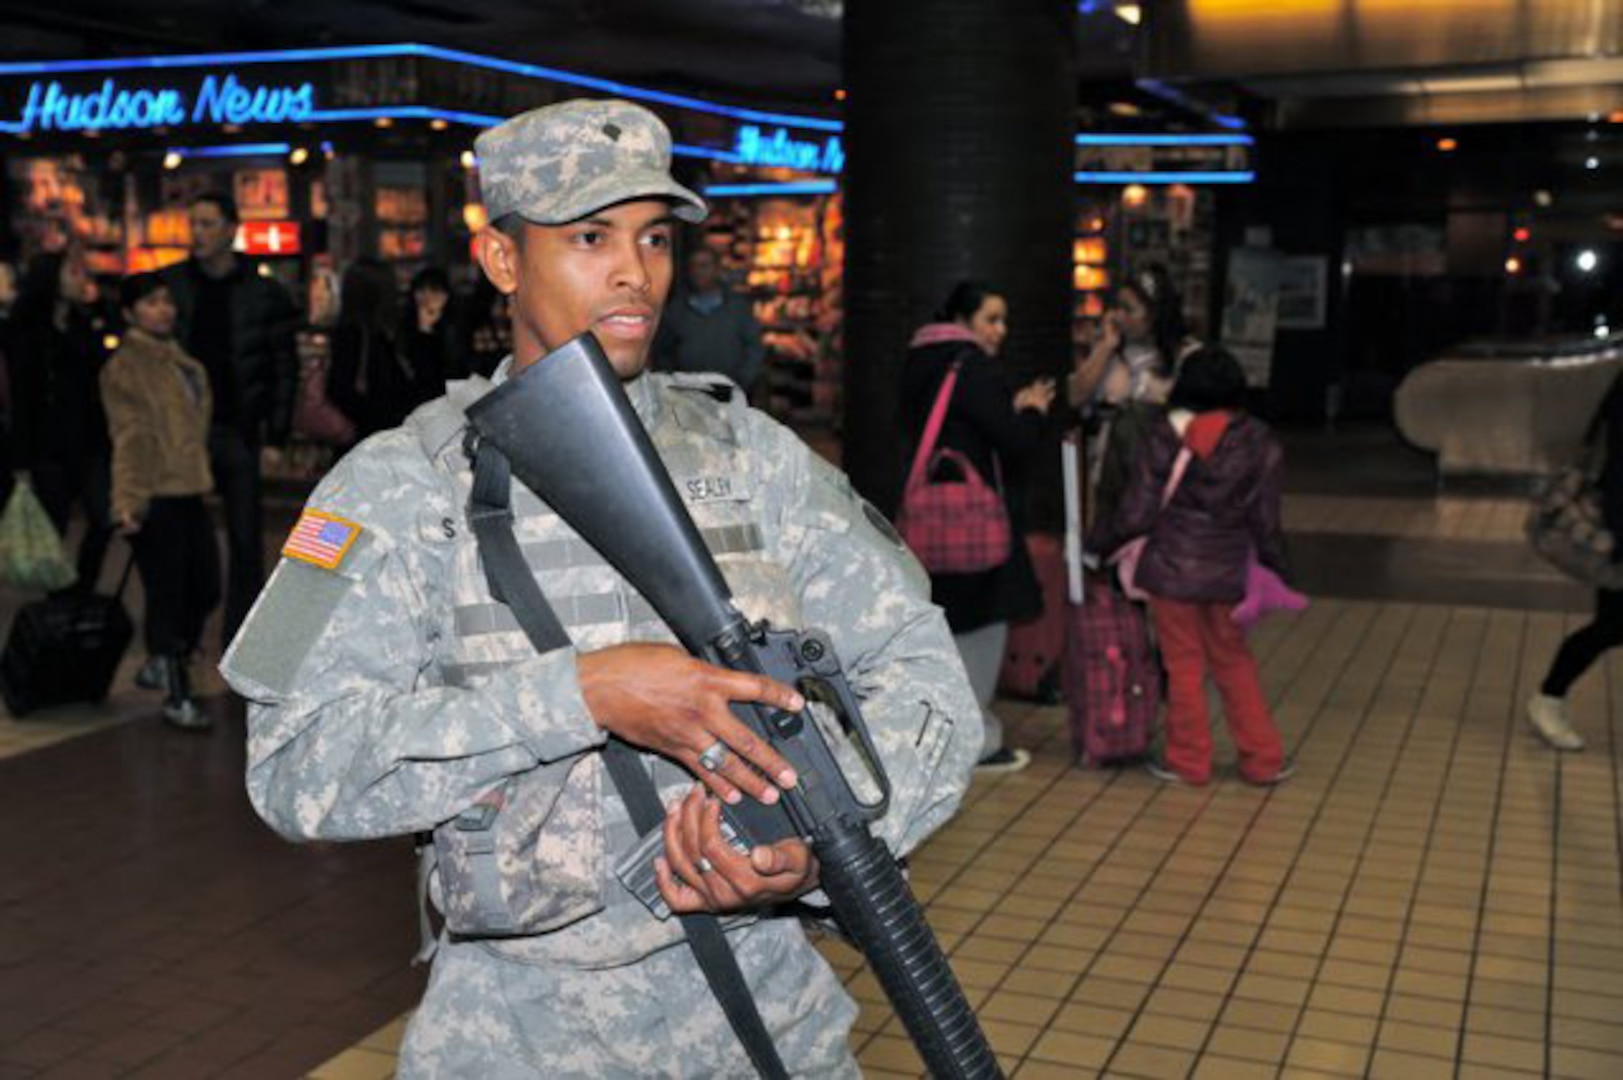 New York Army National Guard Spc. Melvin Seally, assigned to Joint Task Force Empire Shield, the New York National Guard's full-time security force in New York City, patrols Pennsylvania Station with police officers on Christmas Eve. The members of Joint Task Force Empire Shield will be on duty New Years Eve supporting civilian police agencies.